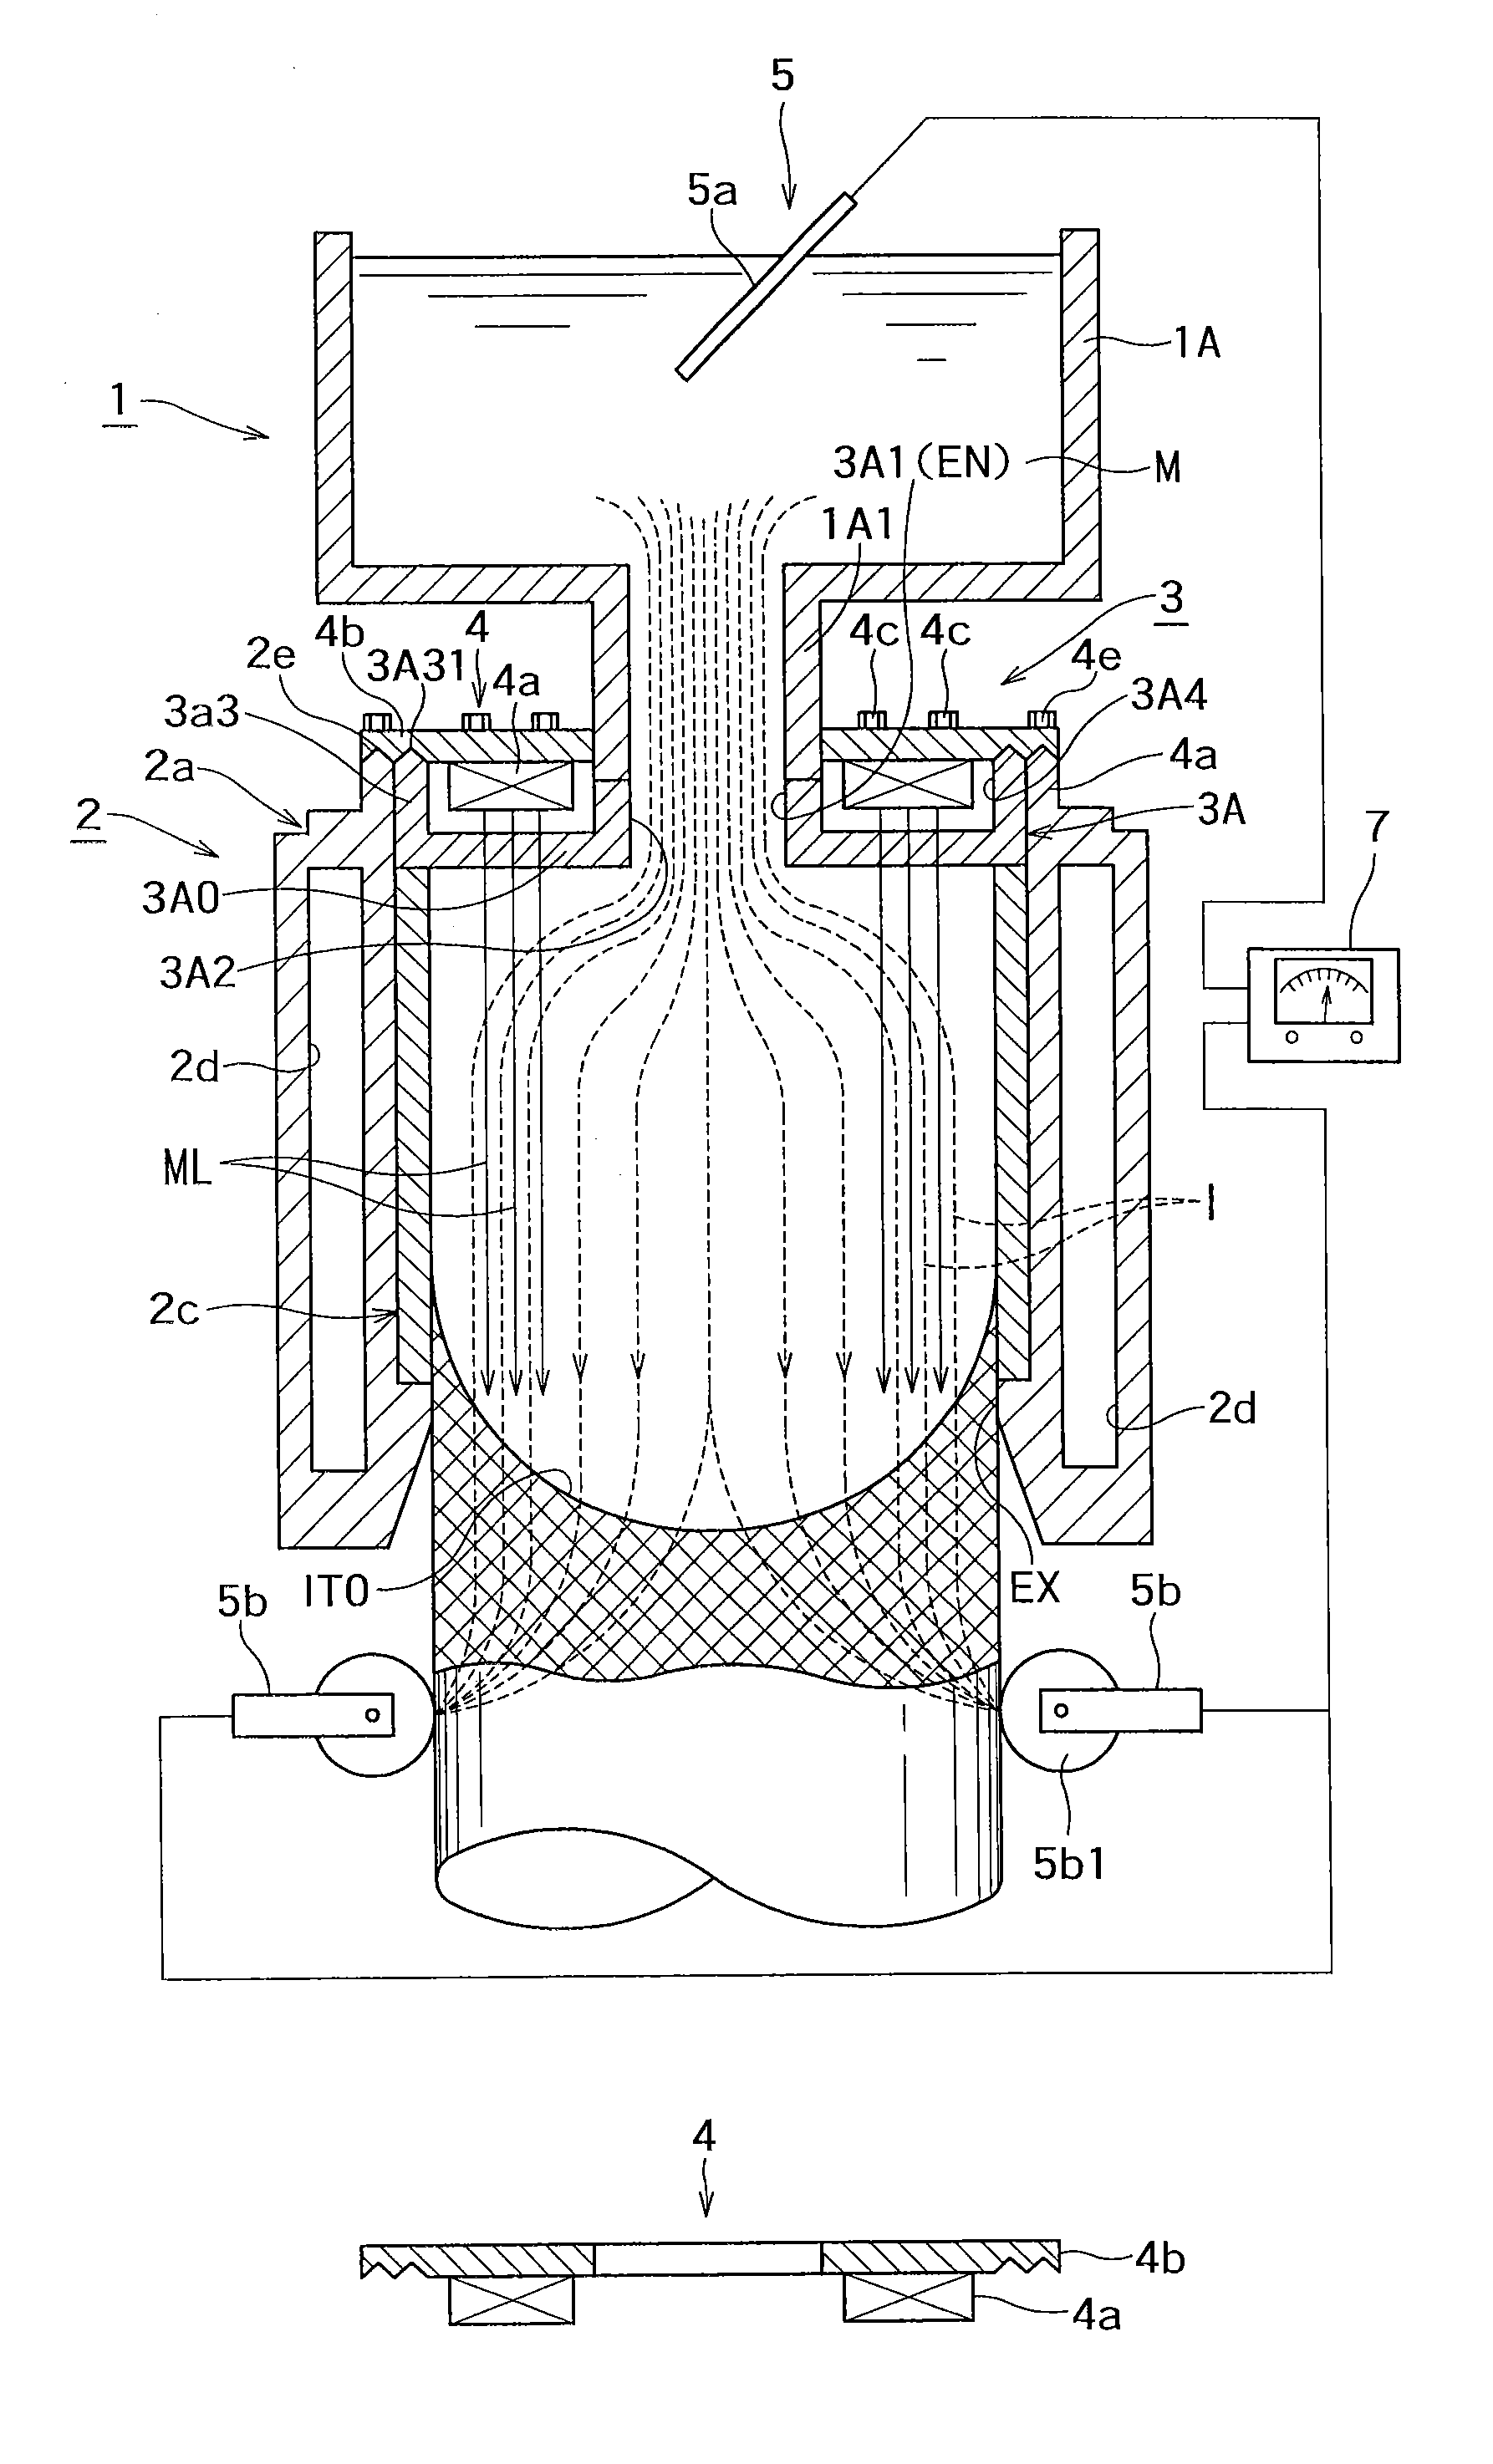 Molding device for continuous casting with stirring unit